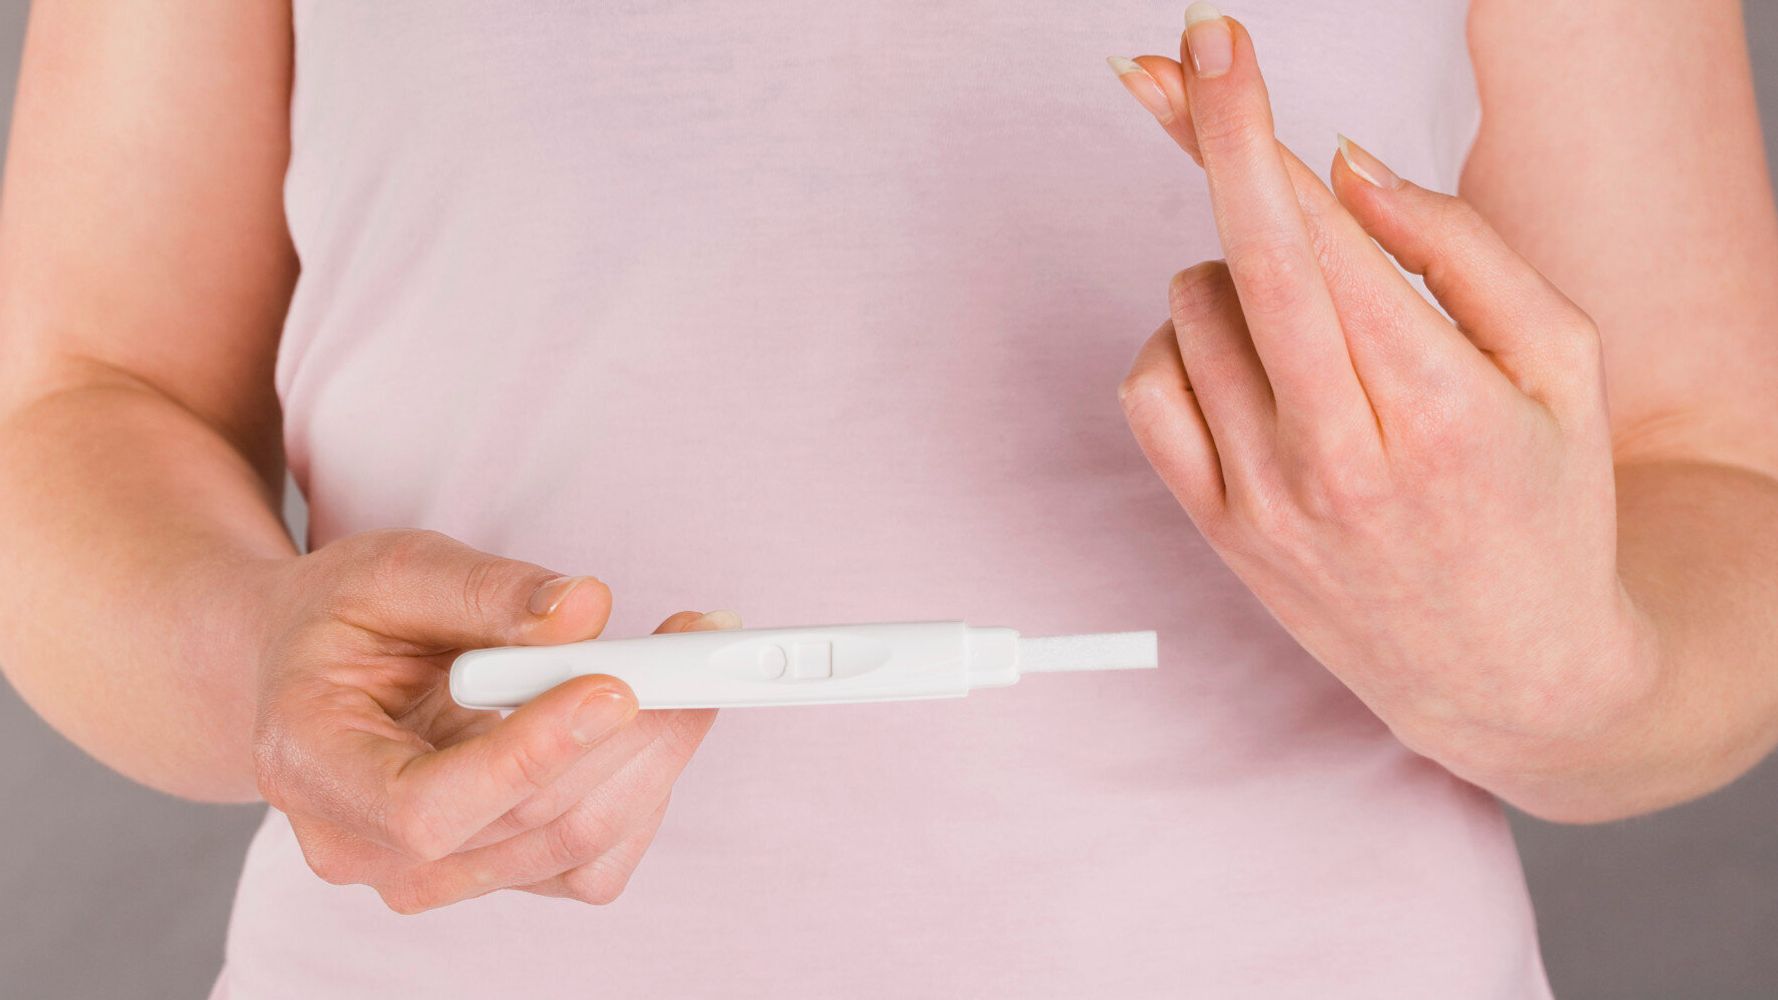 Pregnancy Tests At Home Midwife S Advice On Whether They Re Accurate